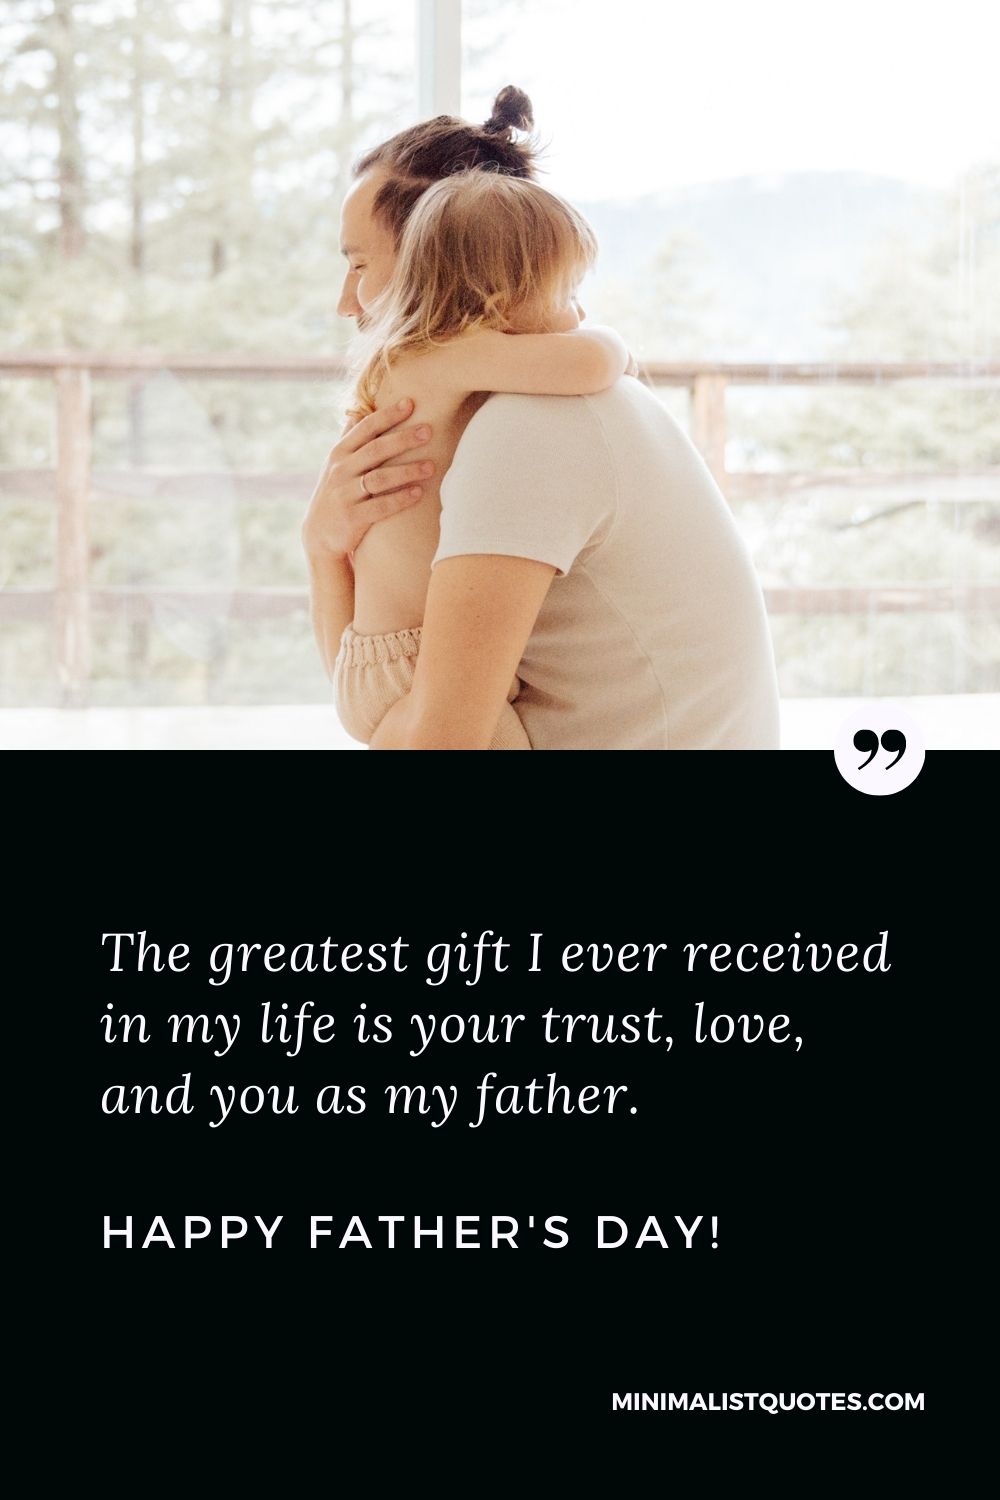 The Greatest Gift You Can Give to Your Husband: Help Club for Moms Book |  Help Club for Moms